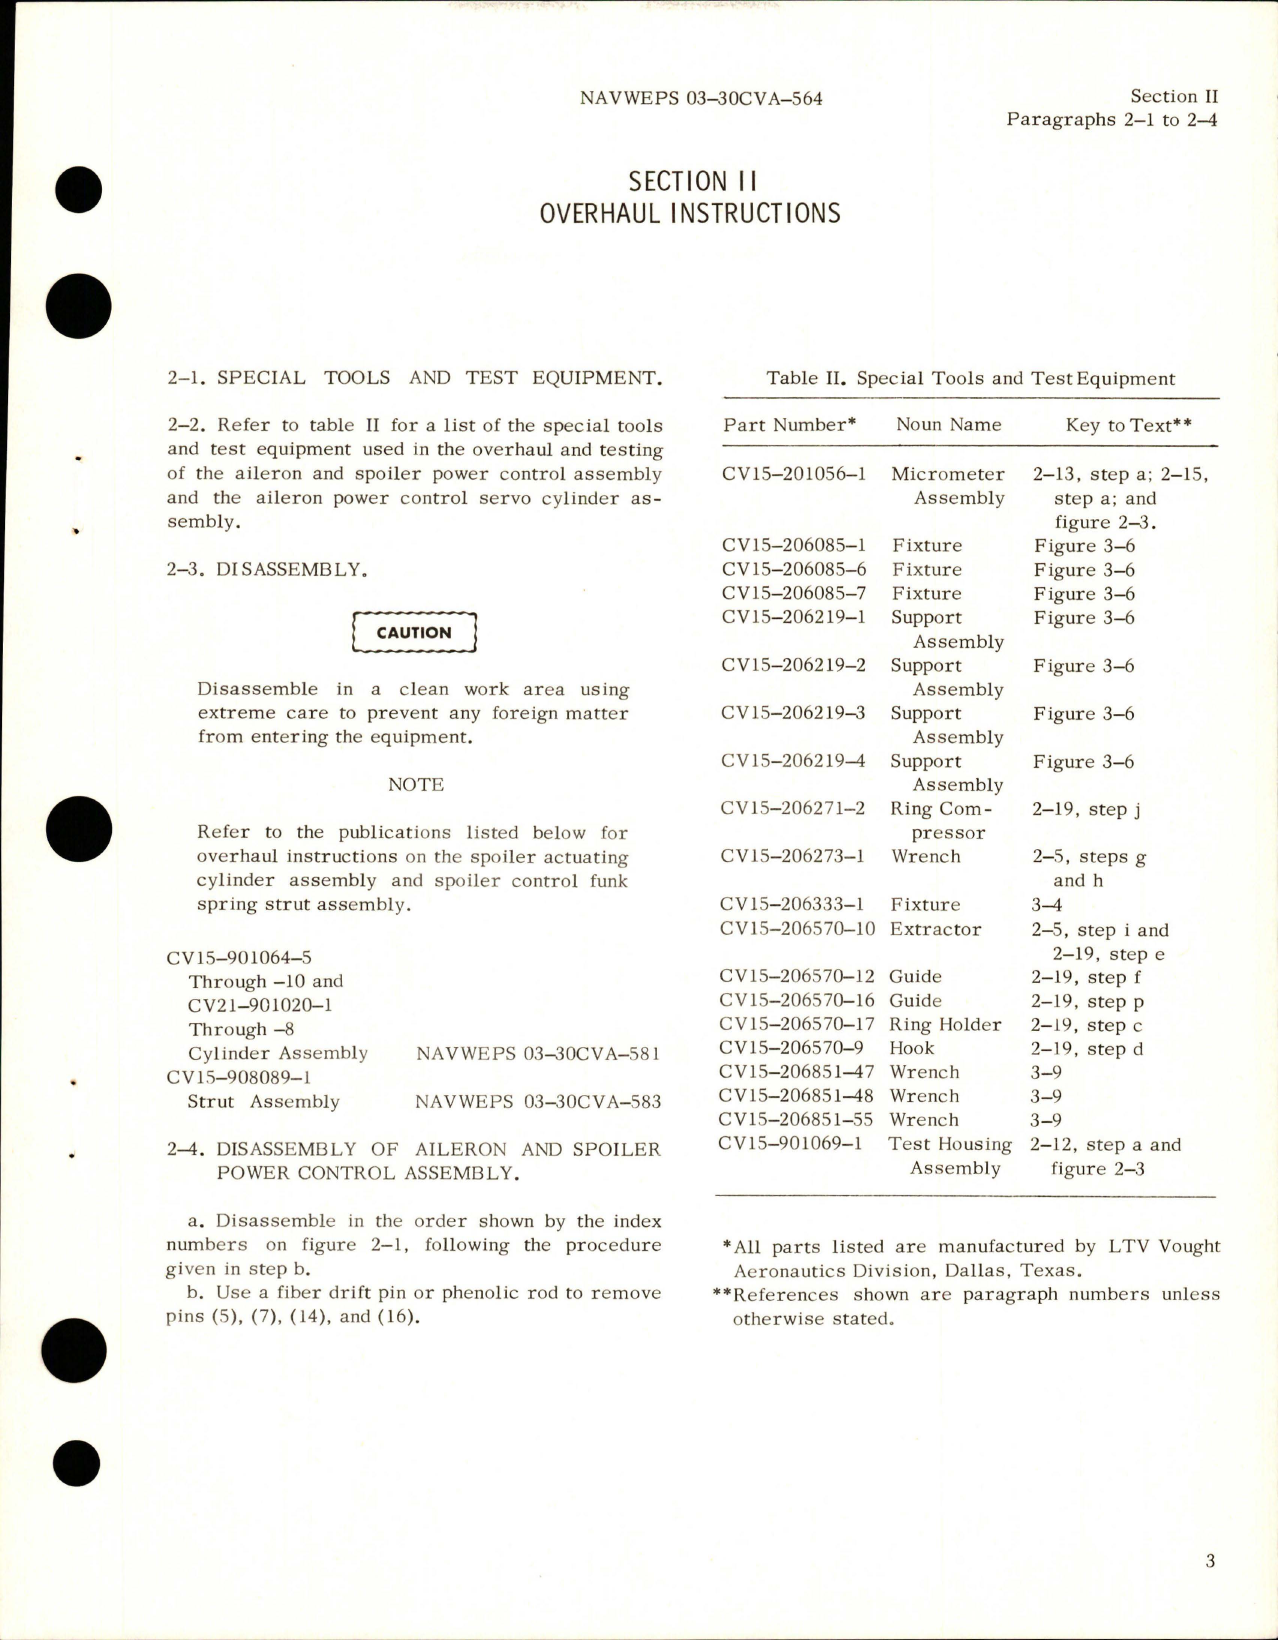 Sample page 7 from AirCorps Library document: Overhaul Instructions for Aileron & Spoiler Power Control Assembly and Servo Cylinder